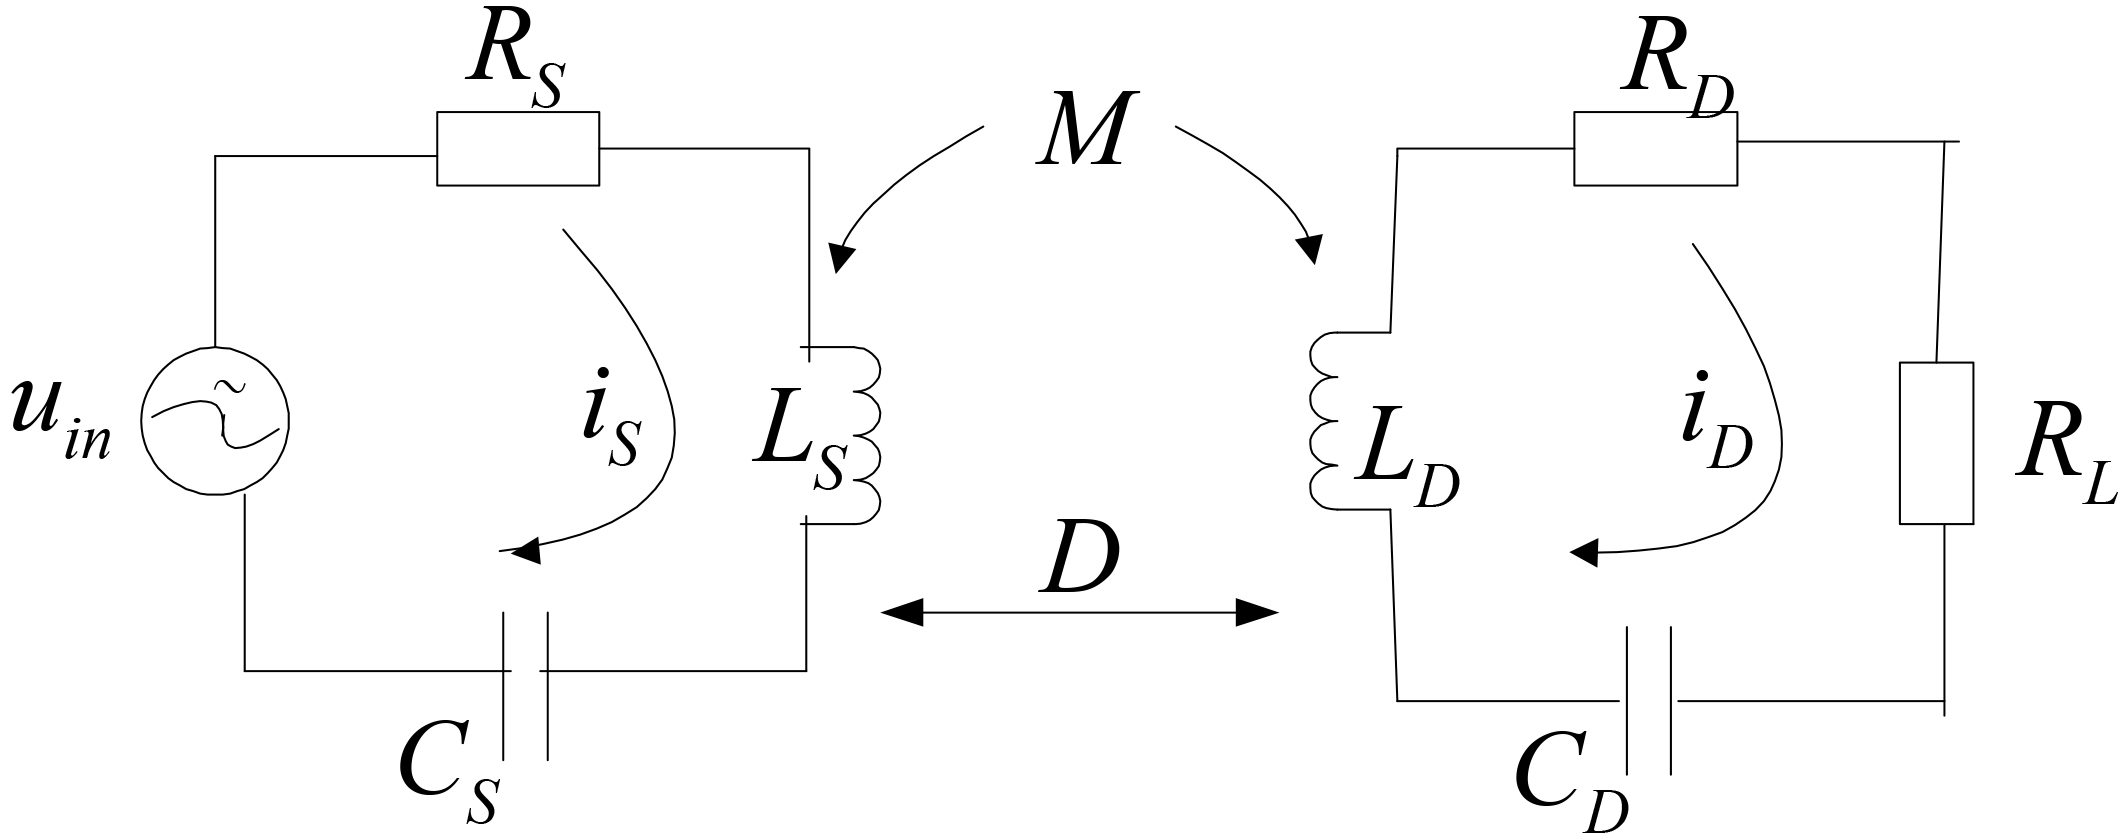 Typical WPT system via magnetic resonance technology.